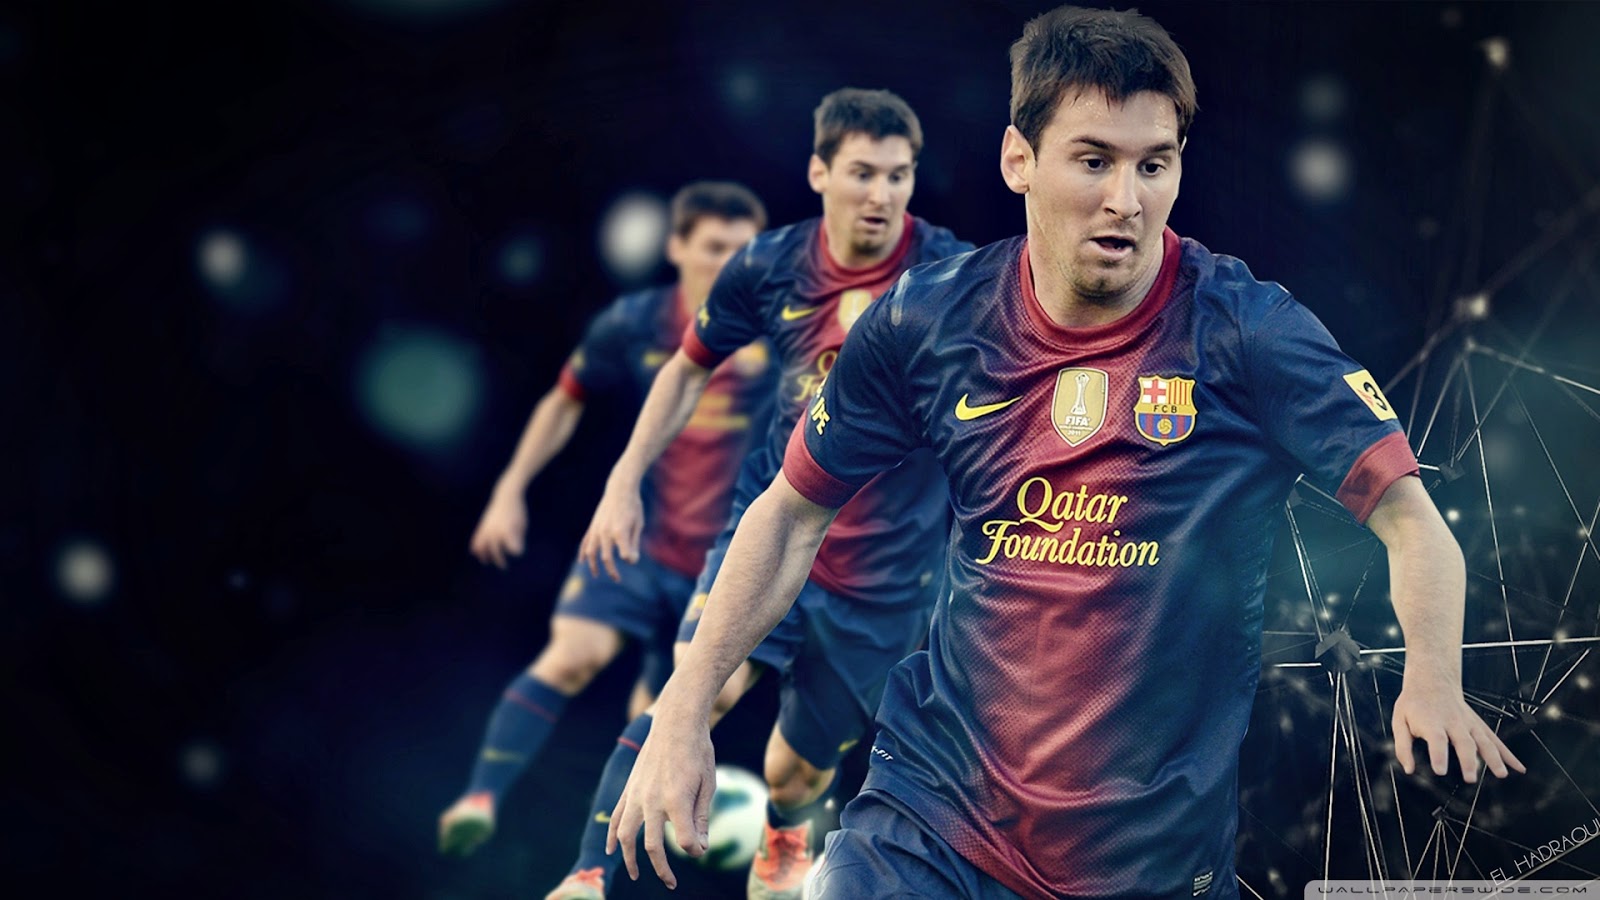 messi wallpaper FULL HD High Definition Wallpapers